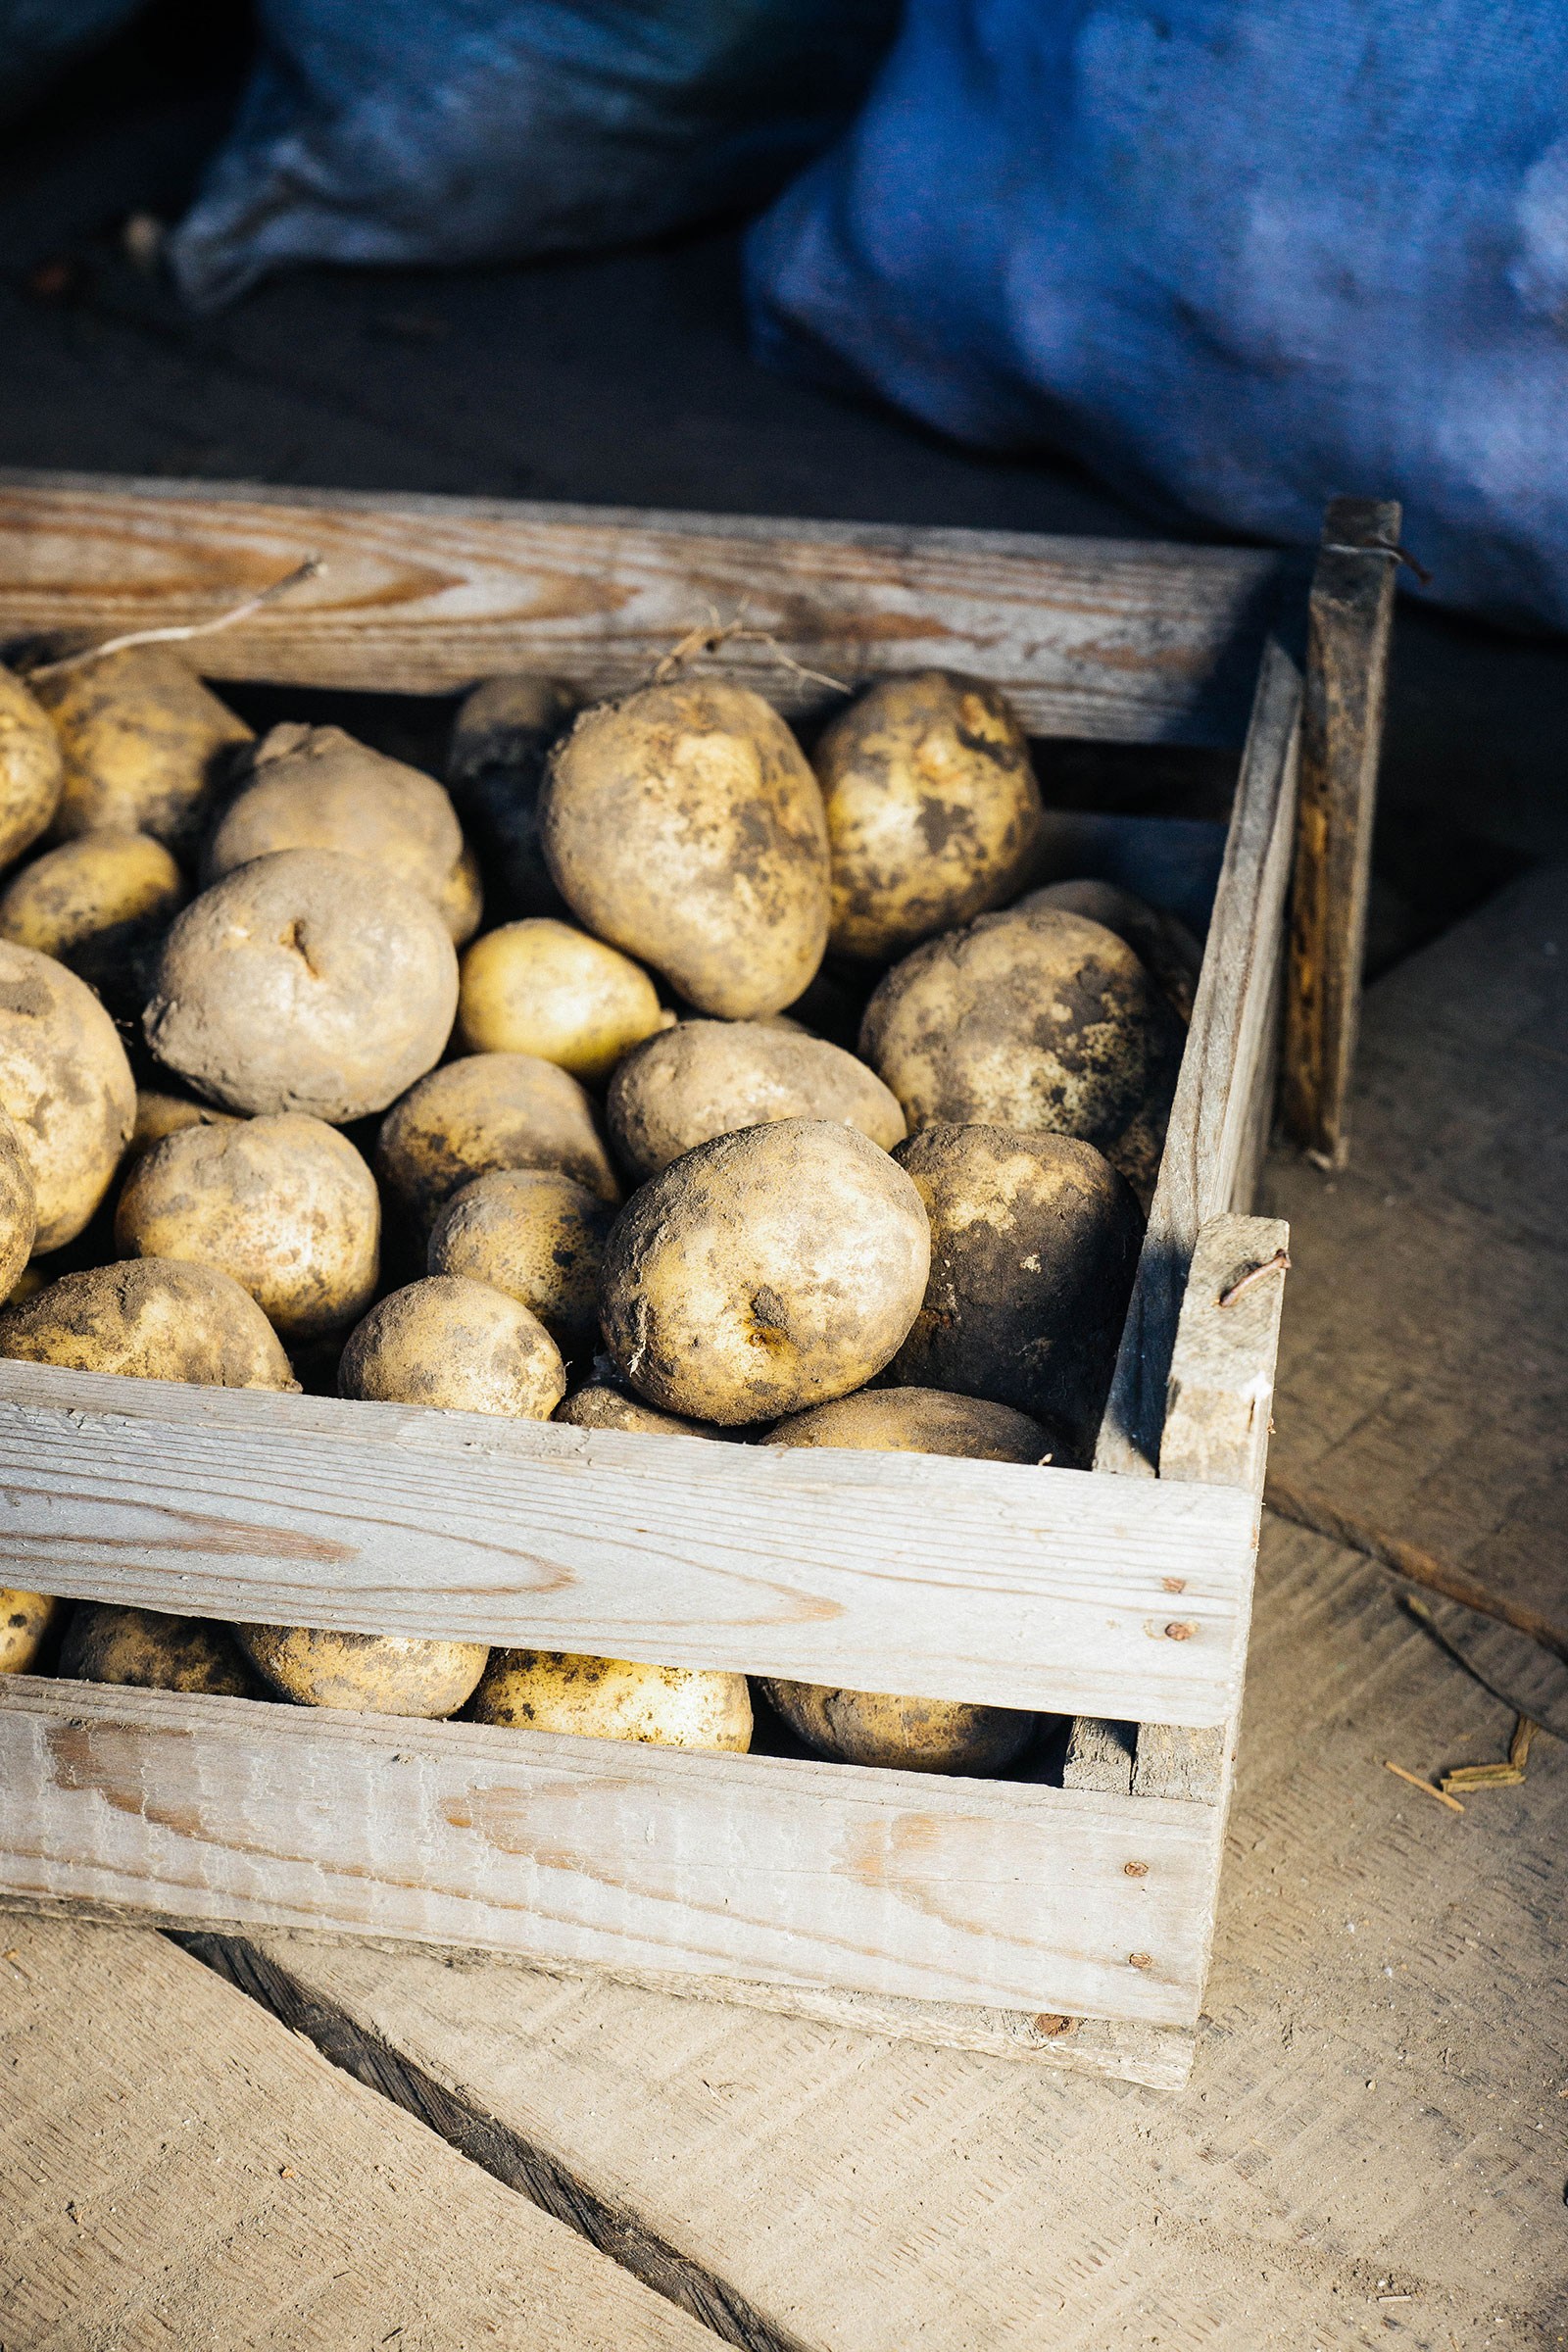 Freshly dug potatoes stored in a rustic wooden crate in a cellar